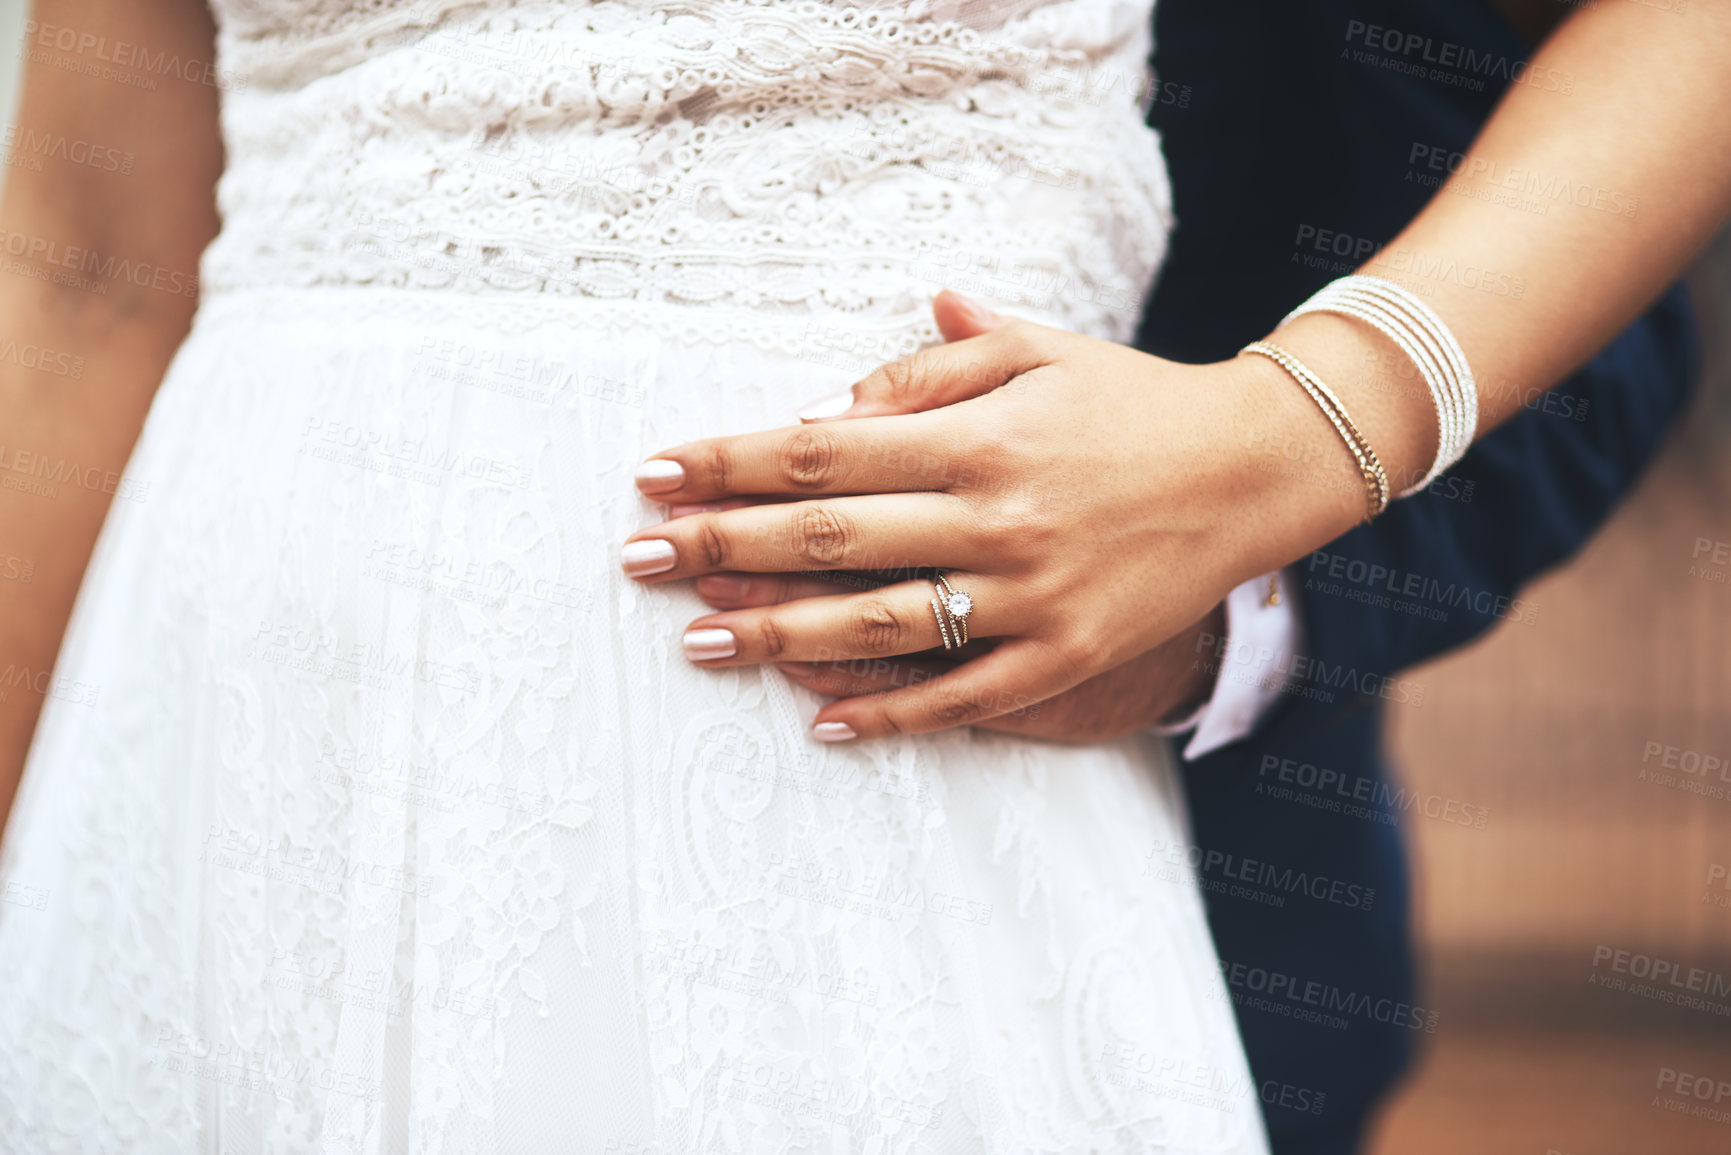 Buy stock photo Cropped shot of an unrecognizable newlywed couple holding hands on their wedding day